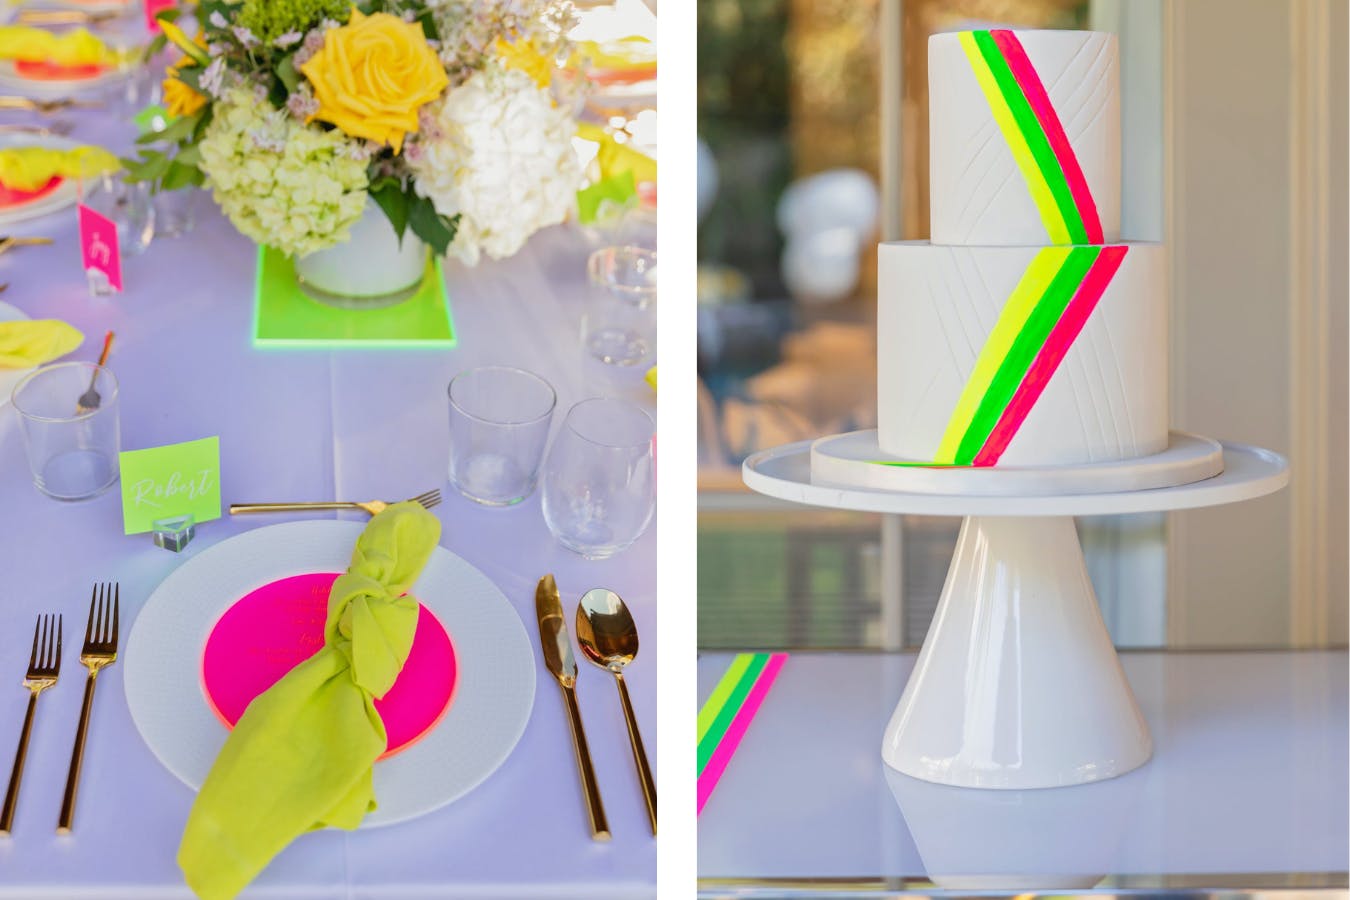 Neon-Themed Birthday Party Cake and Place Setting | PartySlate